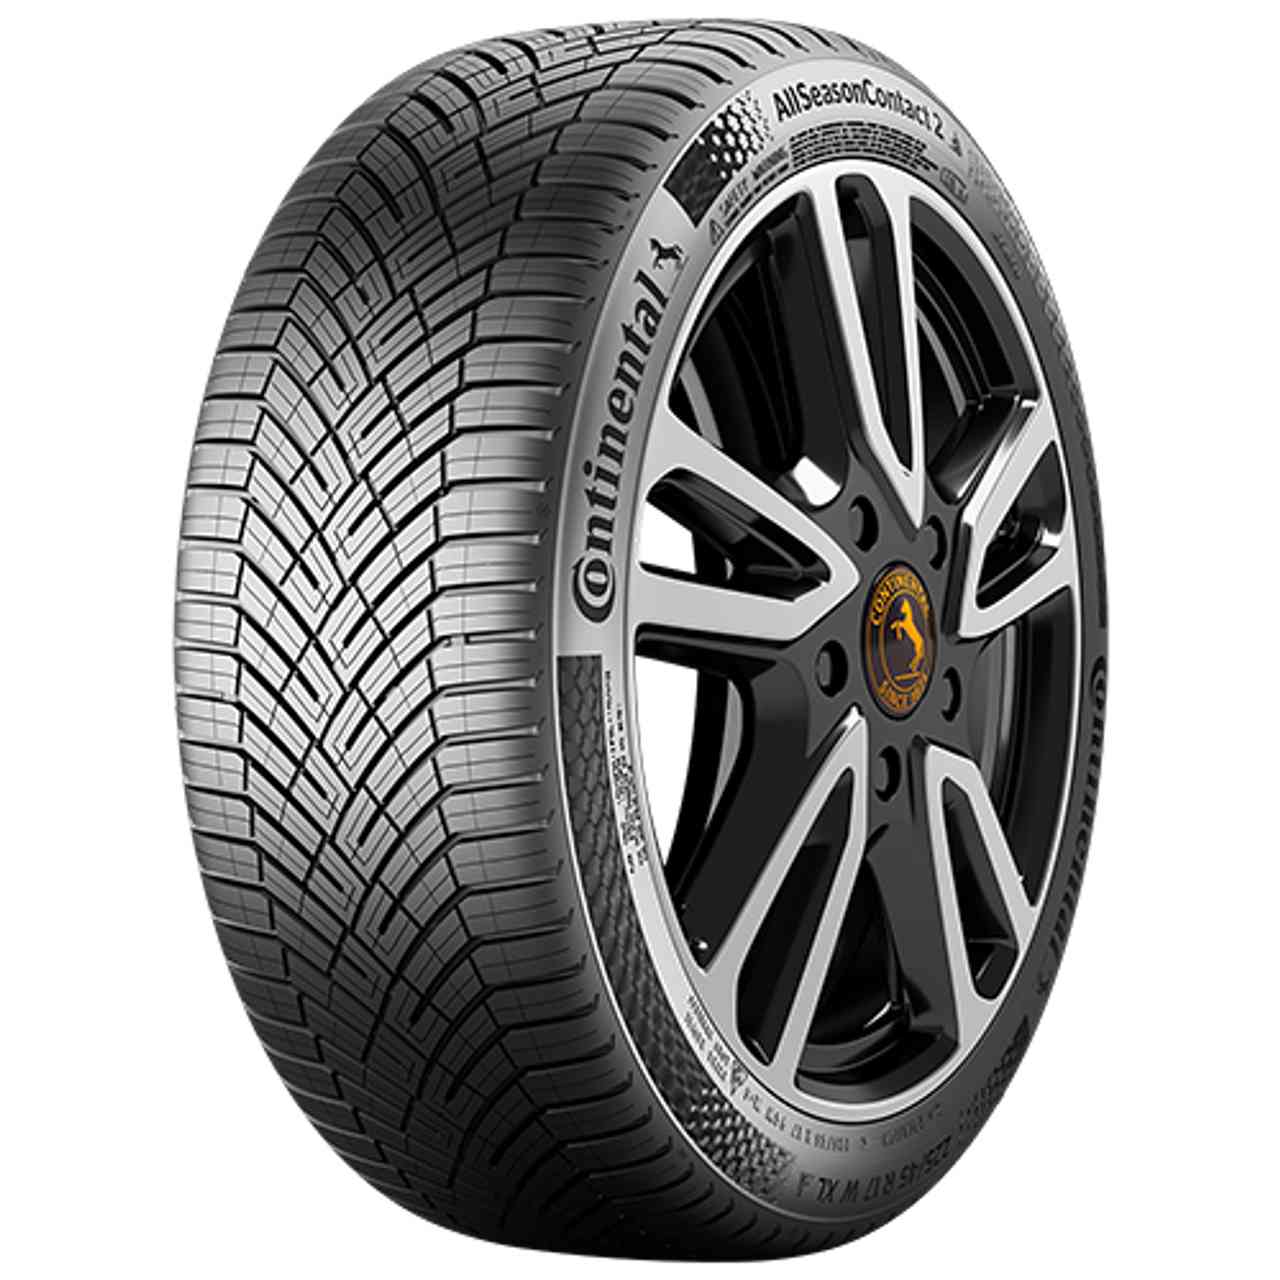 CONTINENTAL ALLSEASONCONTACT 2 (EVc) 215/65R16 102V BSW